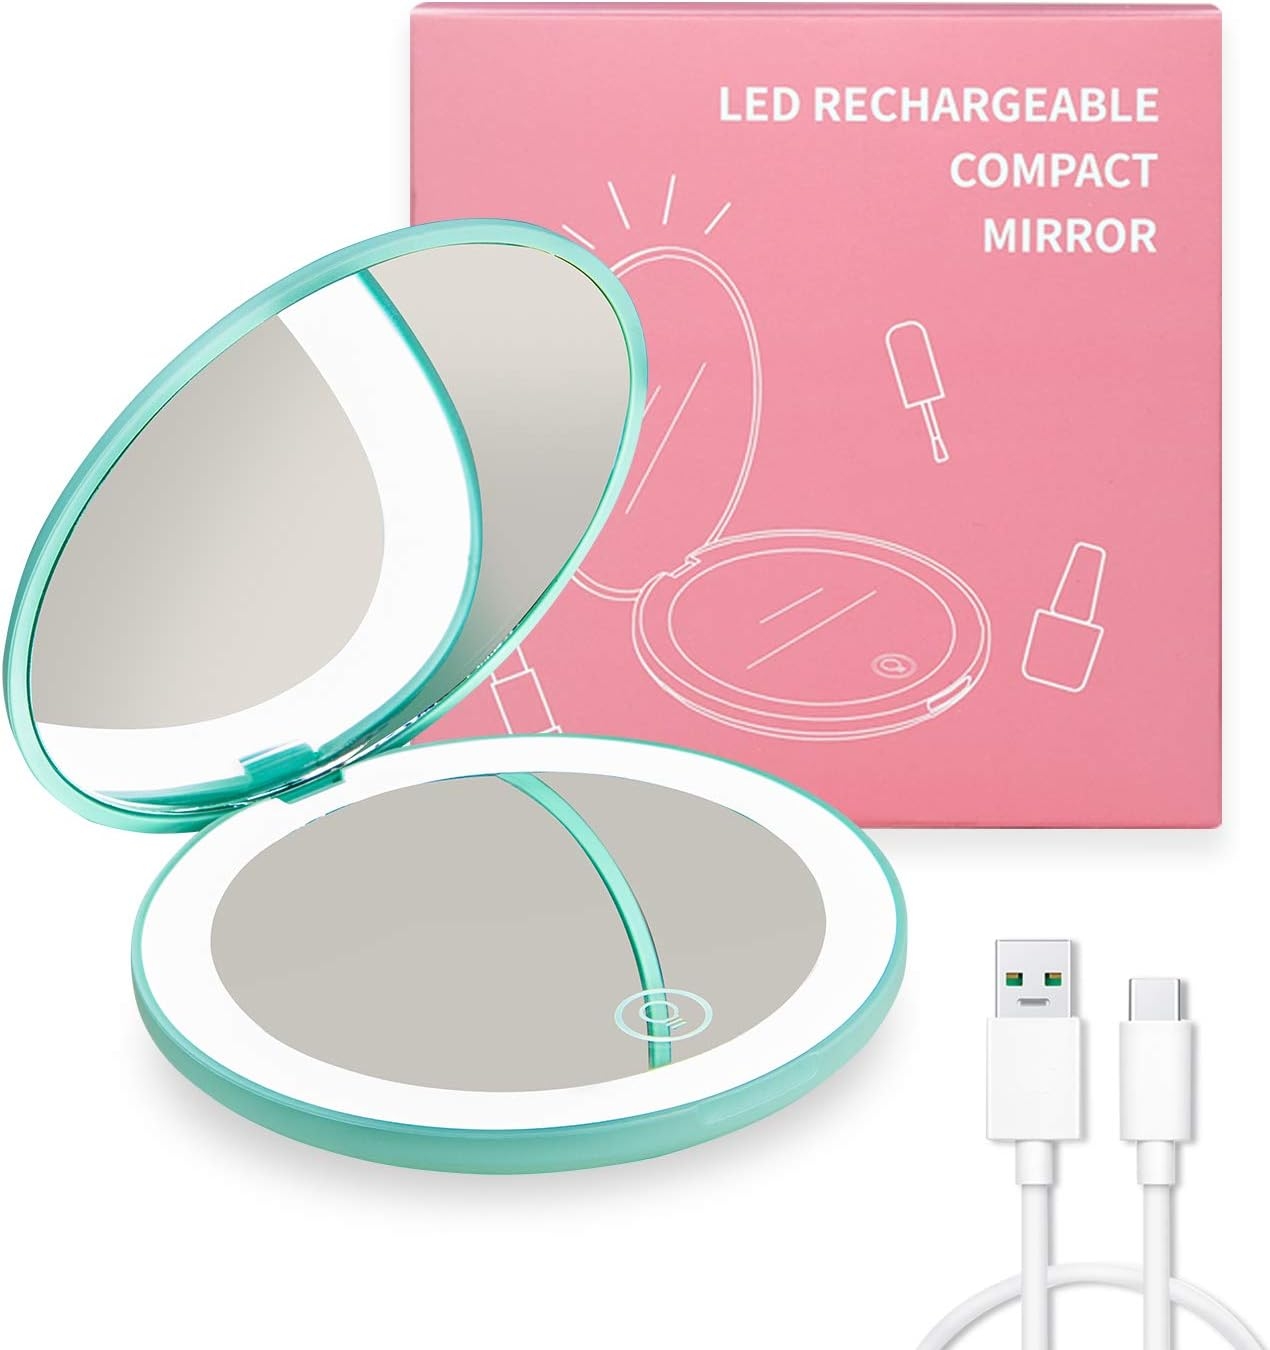 Kintion LED Compact Mirror,Rechargeable Compact Mirror with Light,1x/10x Magnification Dimmable Small Lighted Travel Makeup Mirror for Purse,Pocket,Gift,Touch Switch,Daylight,Portable Folding Handheld